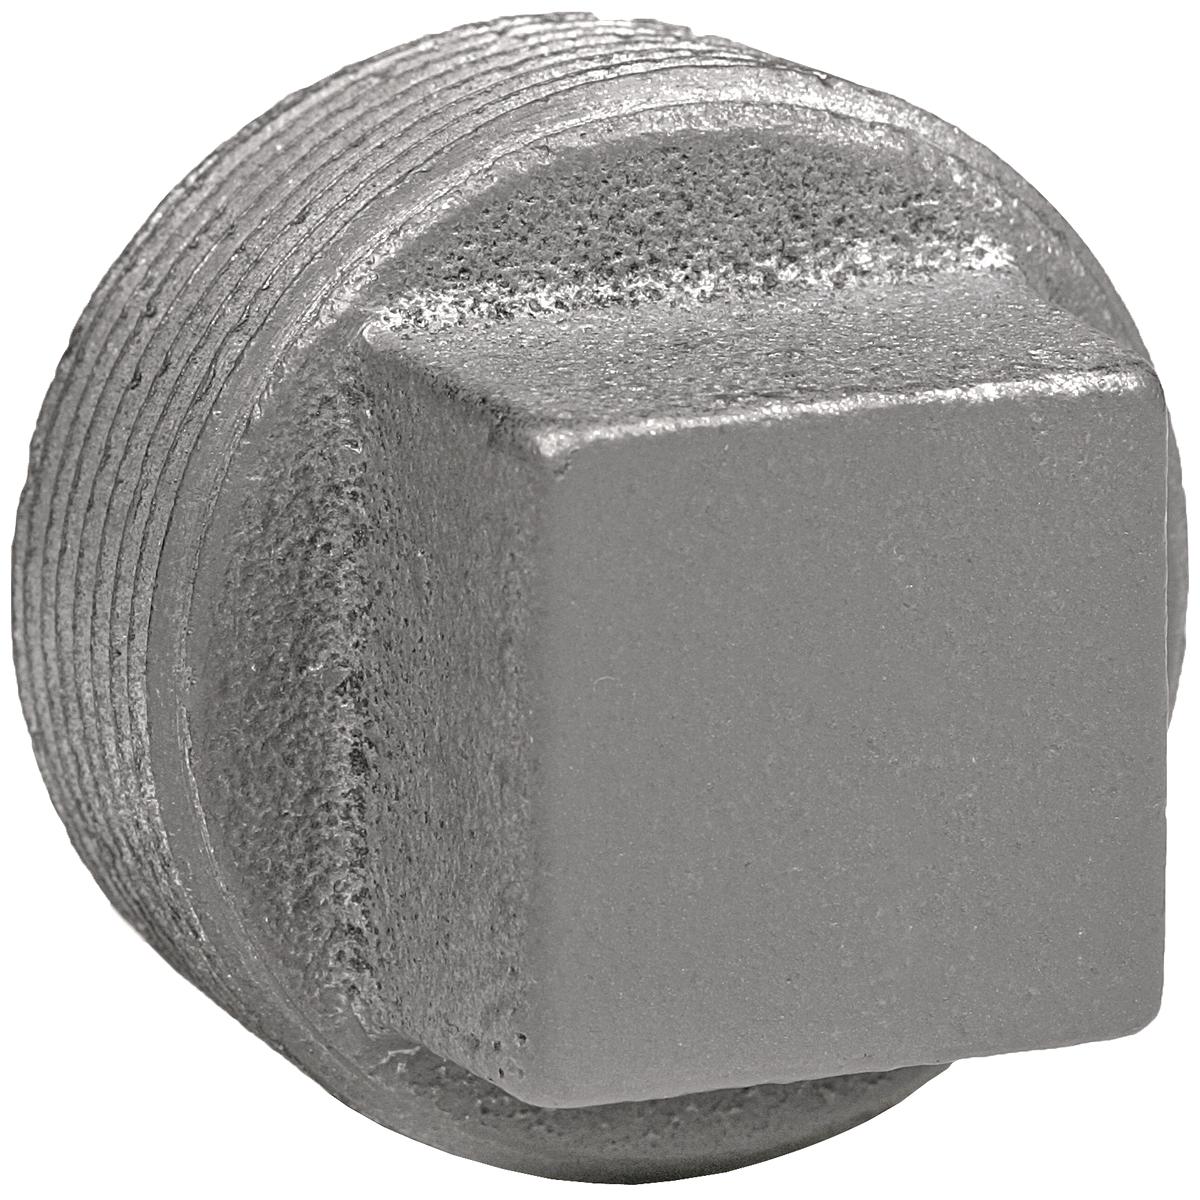 Hubbell PLUG3-SQ 1" Steel, (Zinc Plated) Threaded Insert Plug, Square Head  ; Threaded hubs (NPT) ; To close up a tapped hole or hub ; Threaded hubs (NPT).